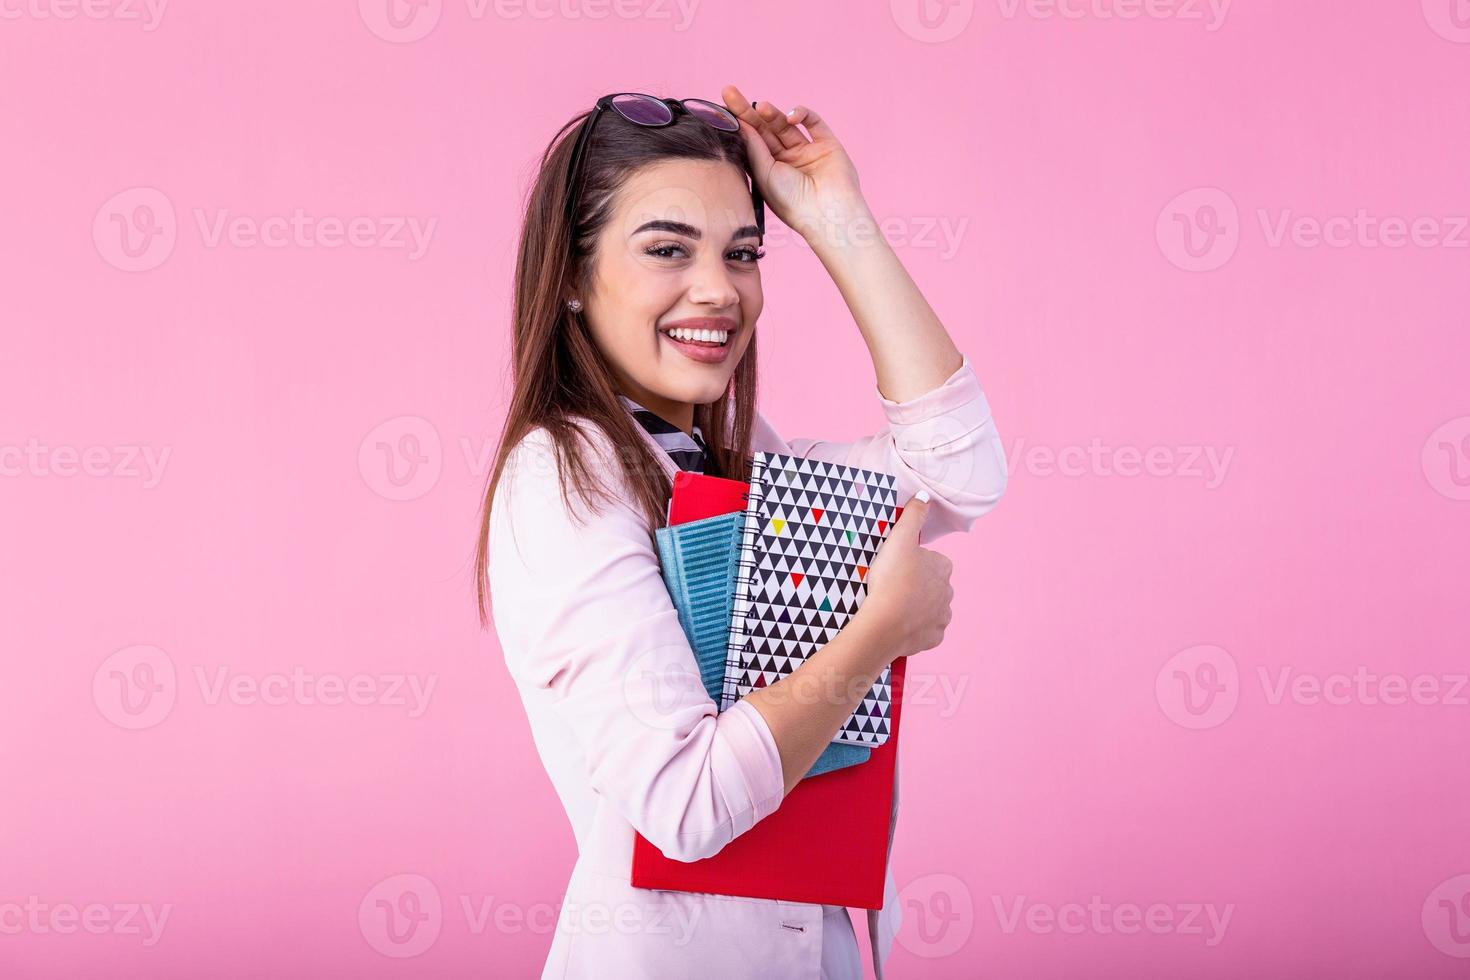 Young female student in glasses holding books in hand isolated on pink background portrait, casual daily lifestyle student holding notebooks smiling photo